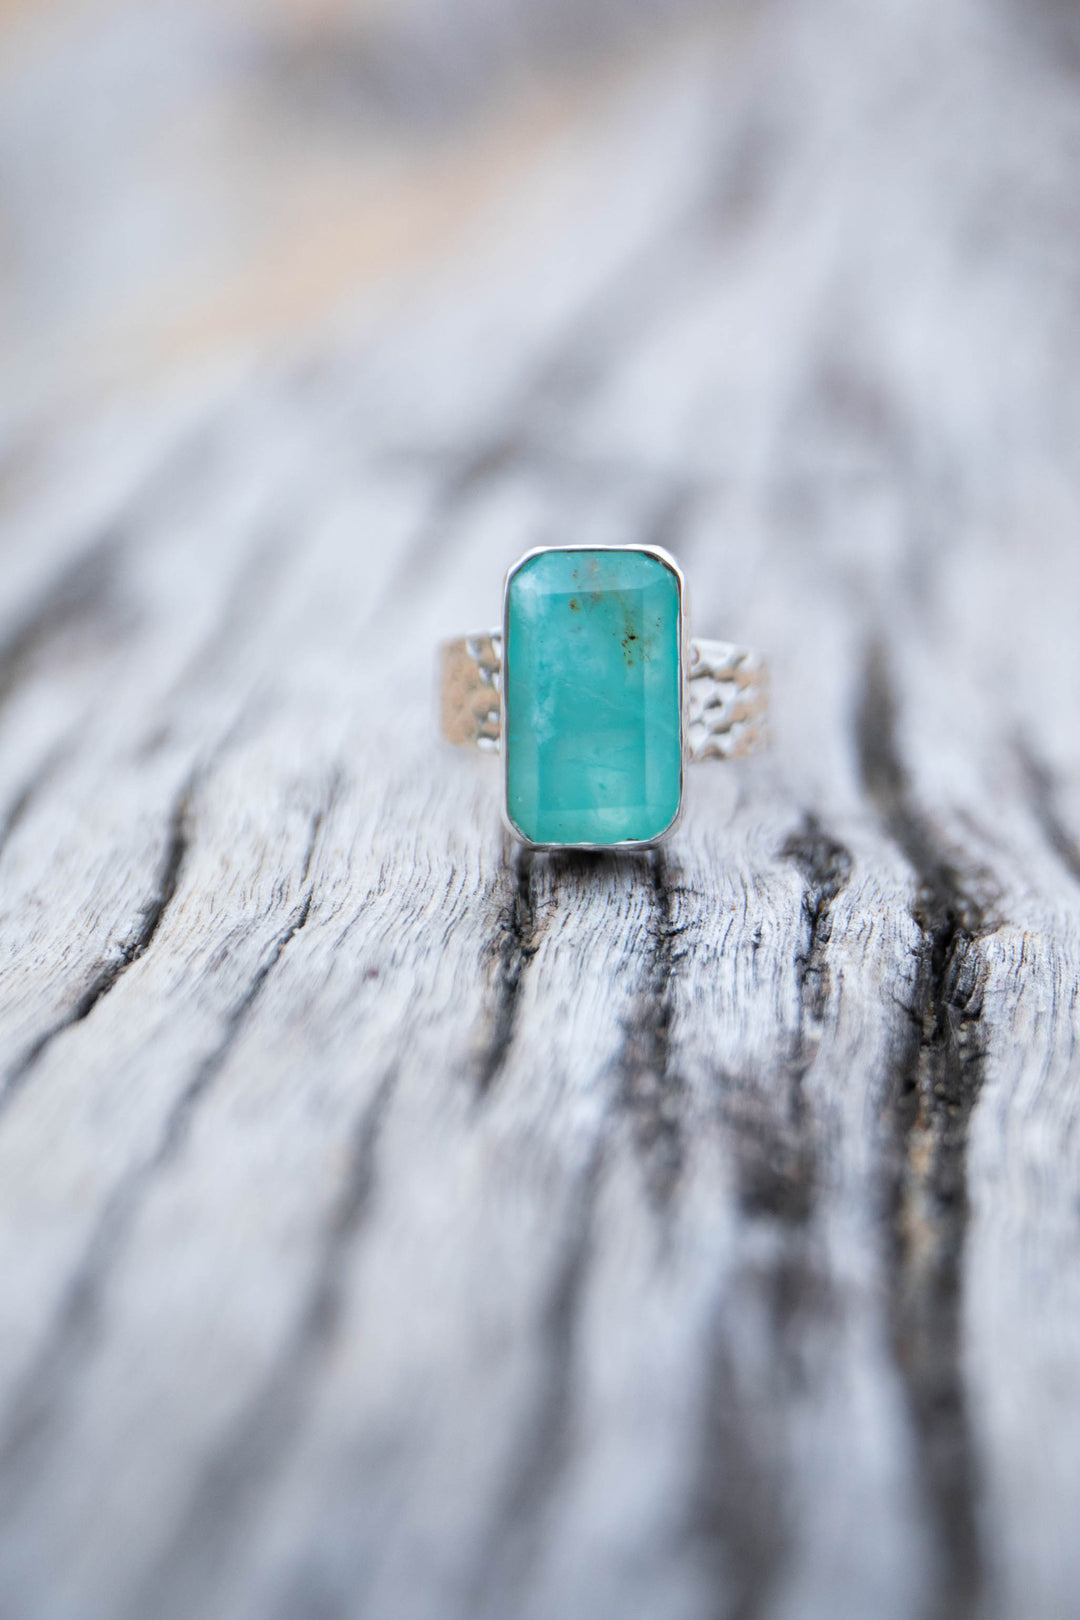 Blue Peruvian Opal Ring in Beaten Sterling Silver with Adjustable Band